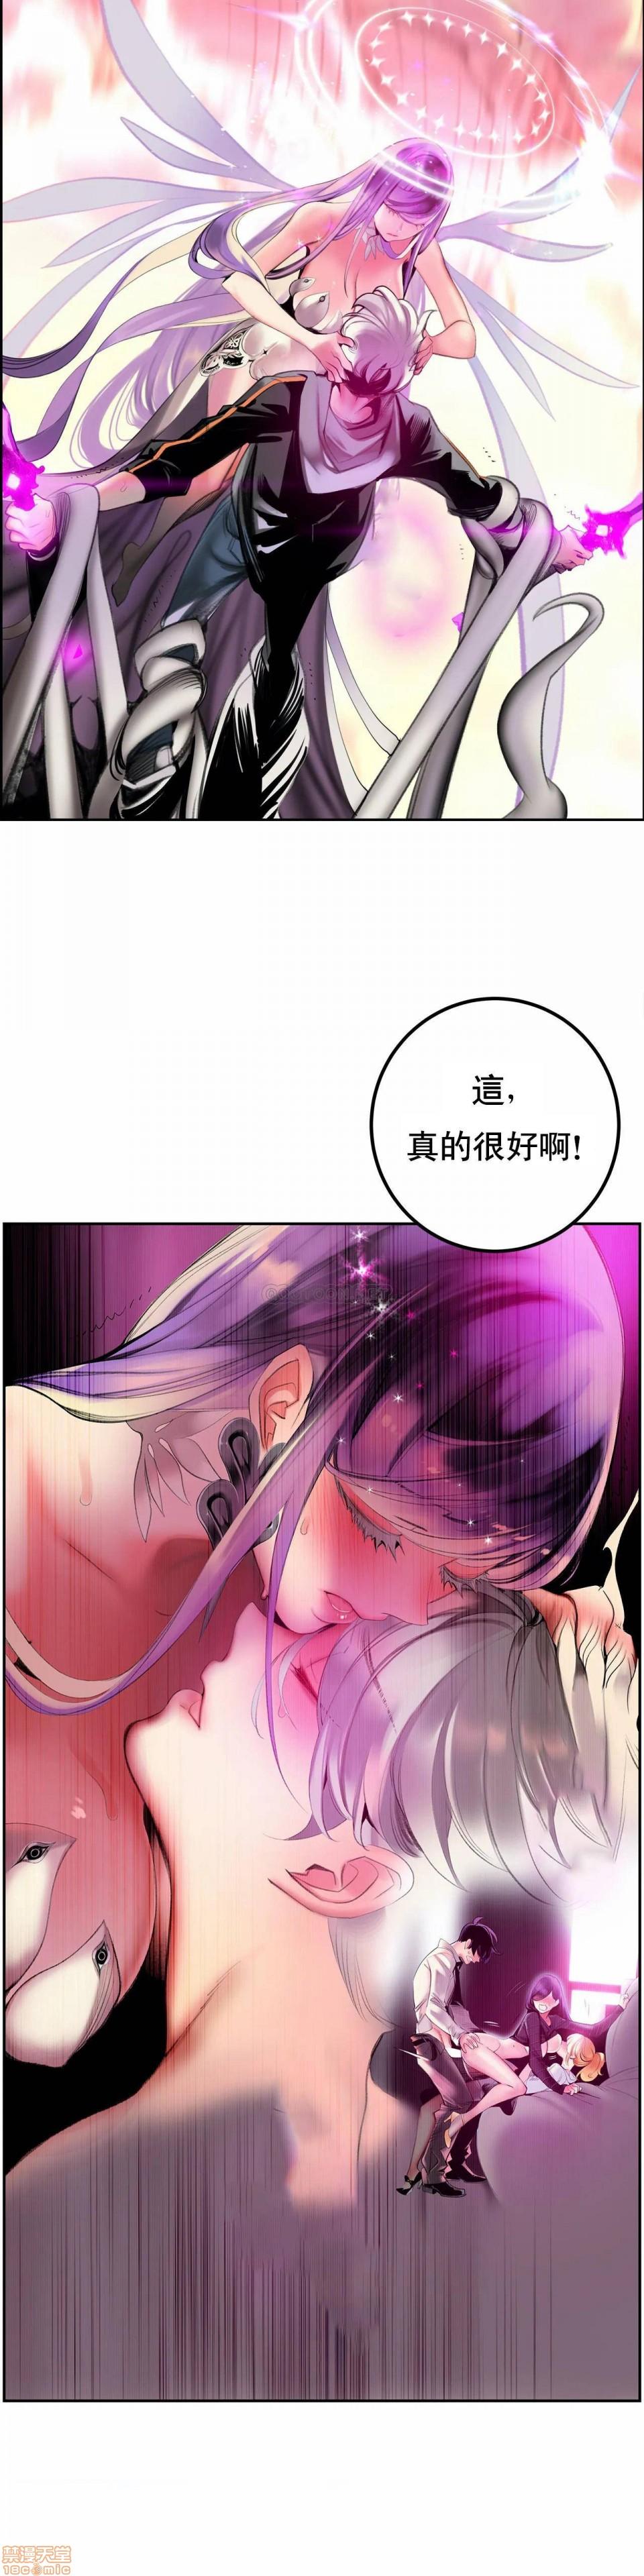 [Juder] Lilith`s Cord (第二季) Ch.77-93 end [Chinese] 153